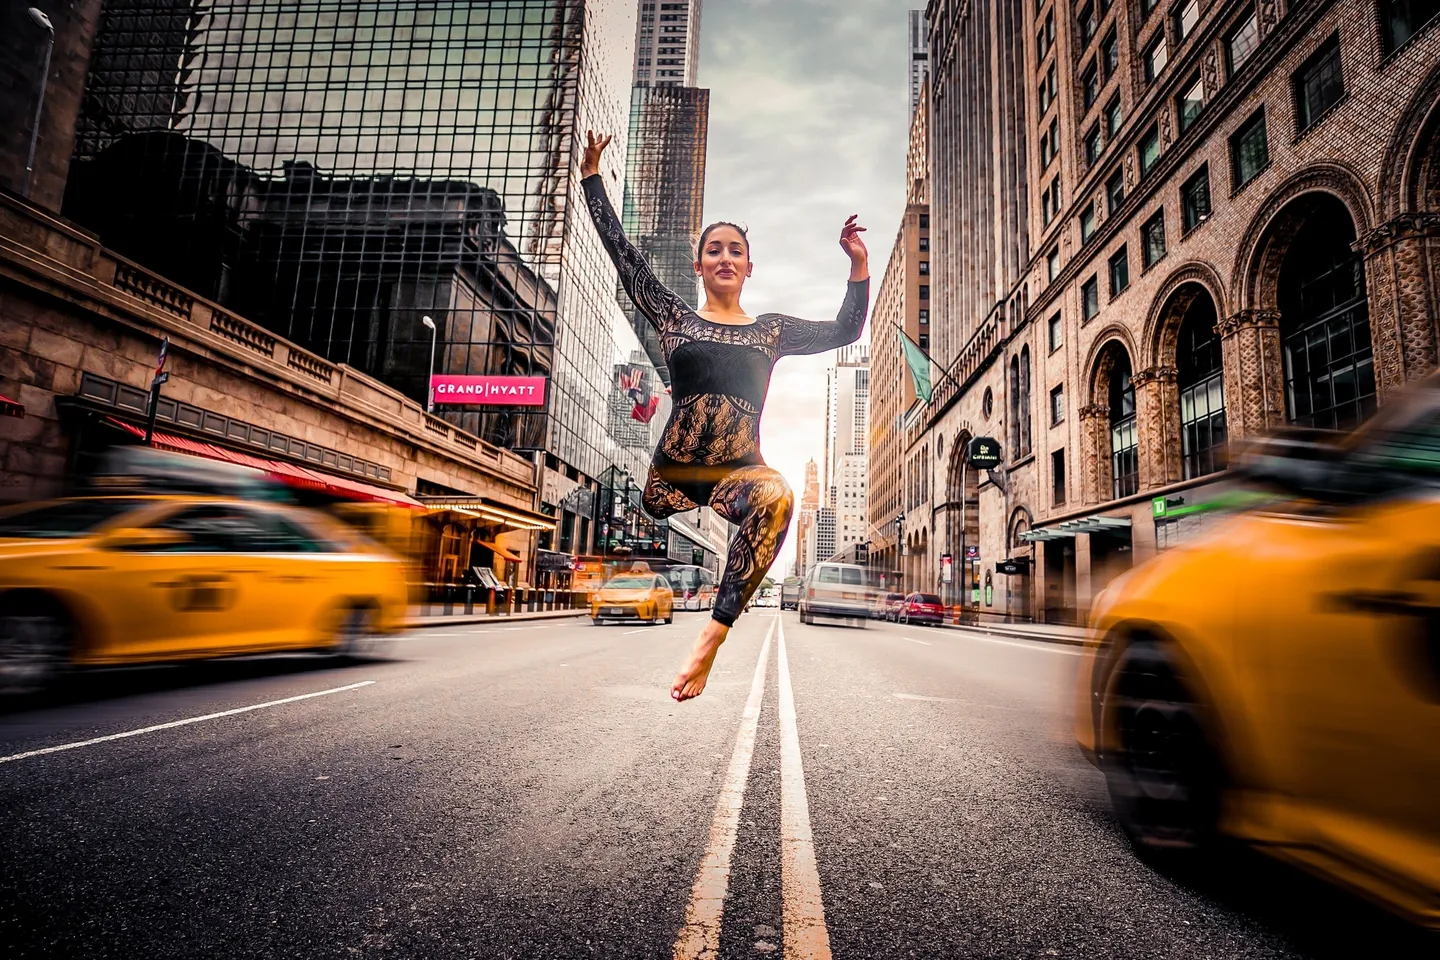 A woman jumping in the air on a street.